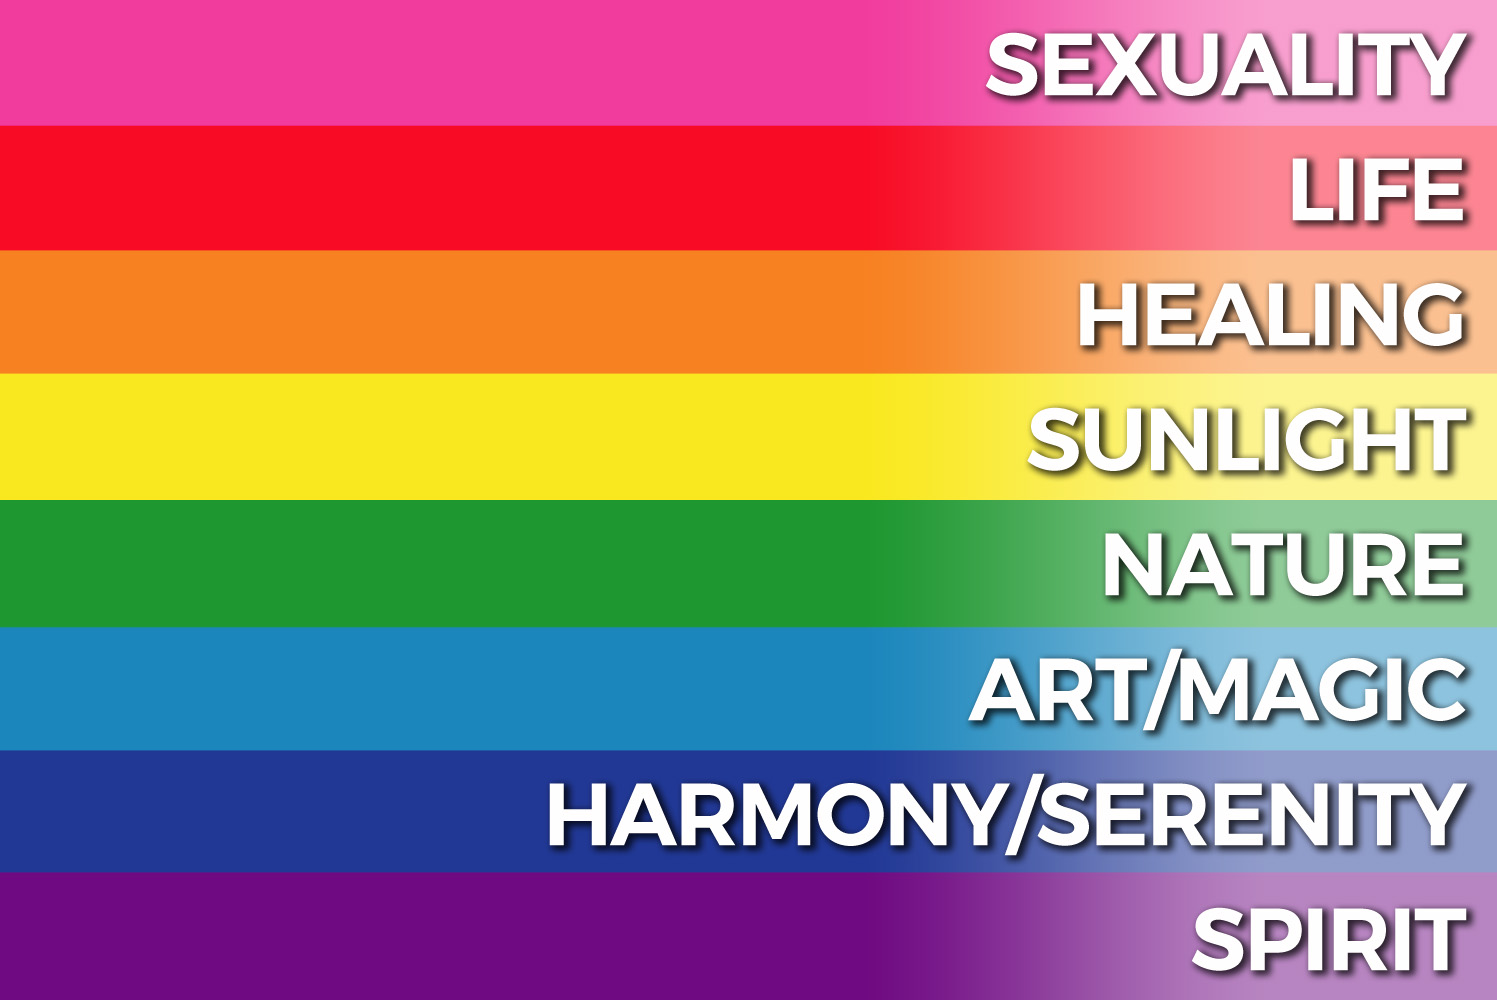 what colors does gay pride rainbow have